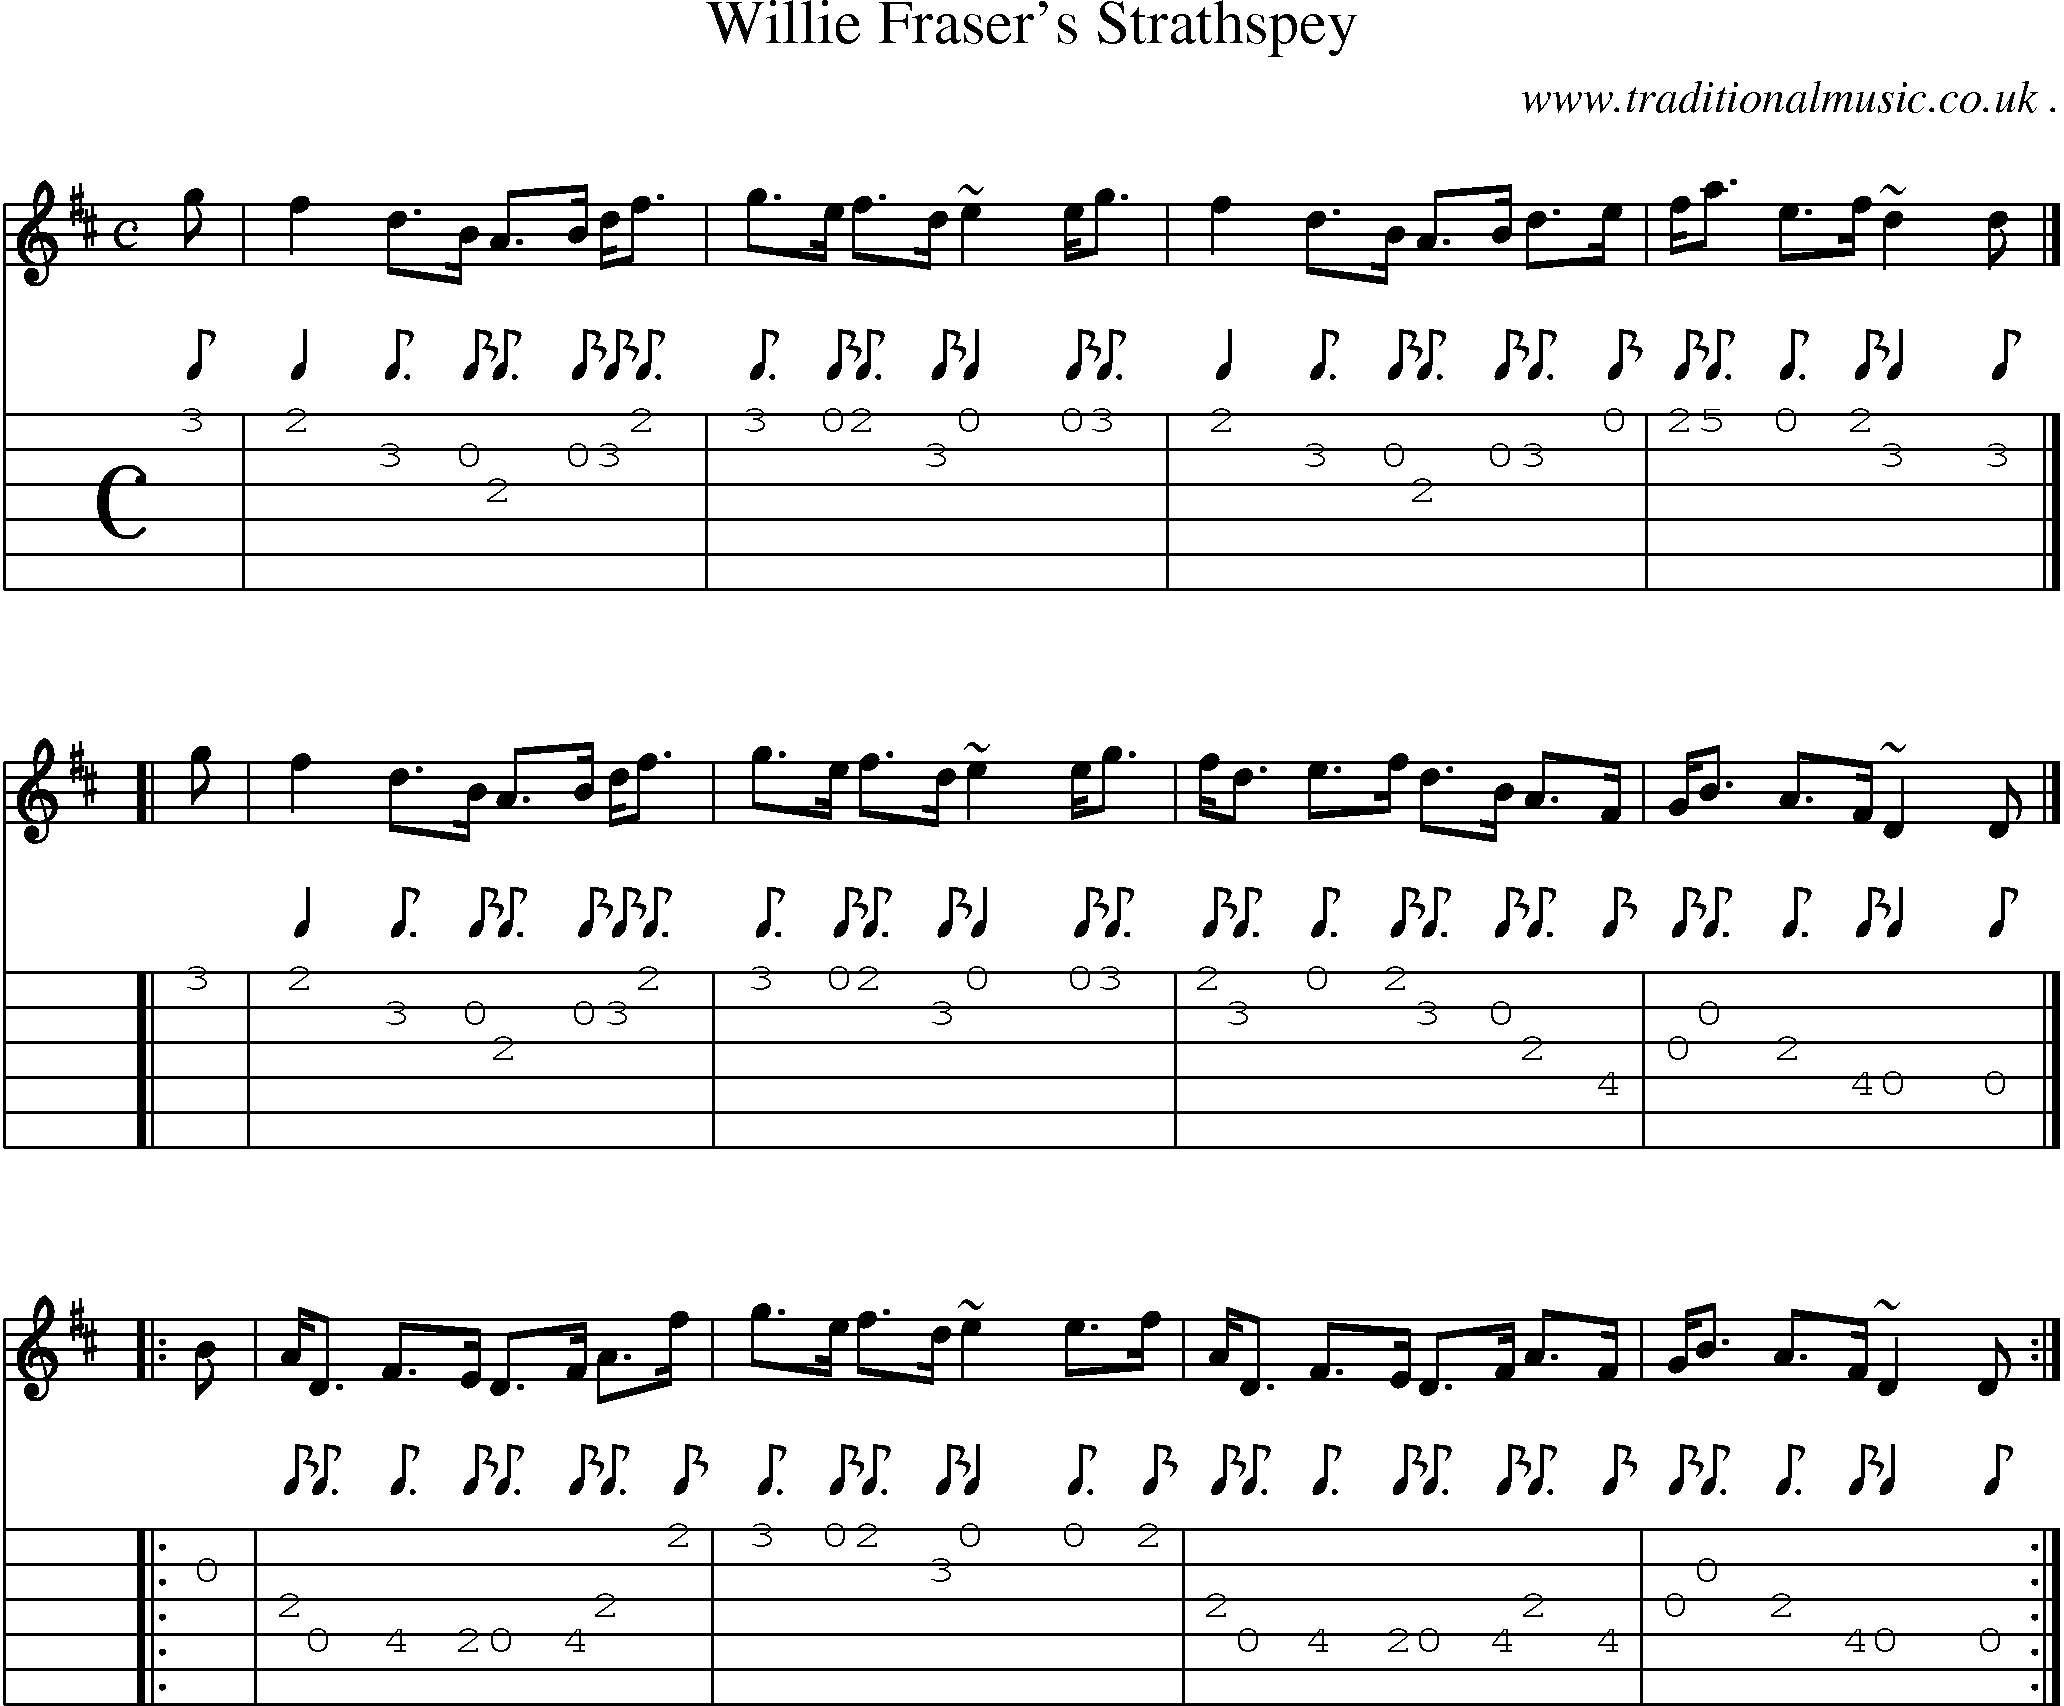 Sheet-music  score, Chords and Guitar Tabs for Willie Frasers Strathspey